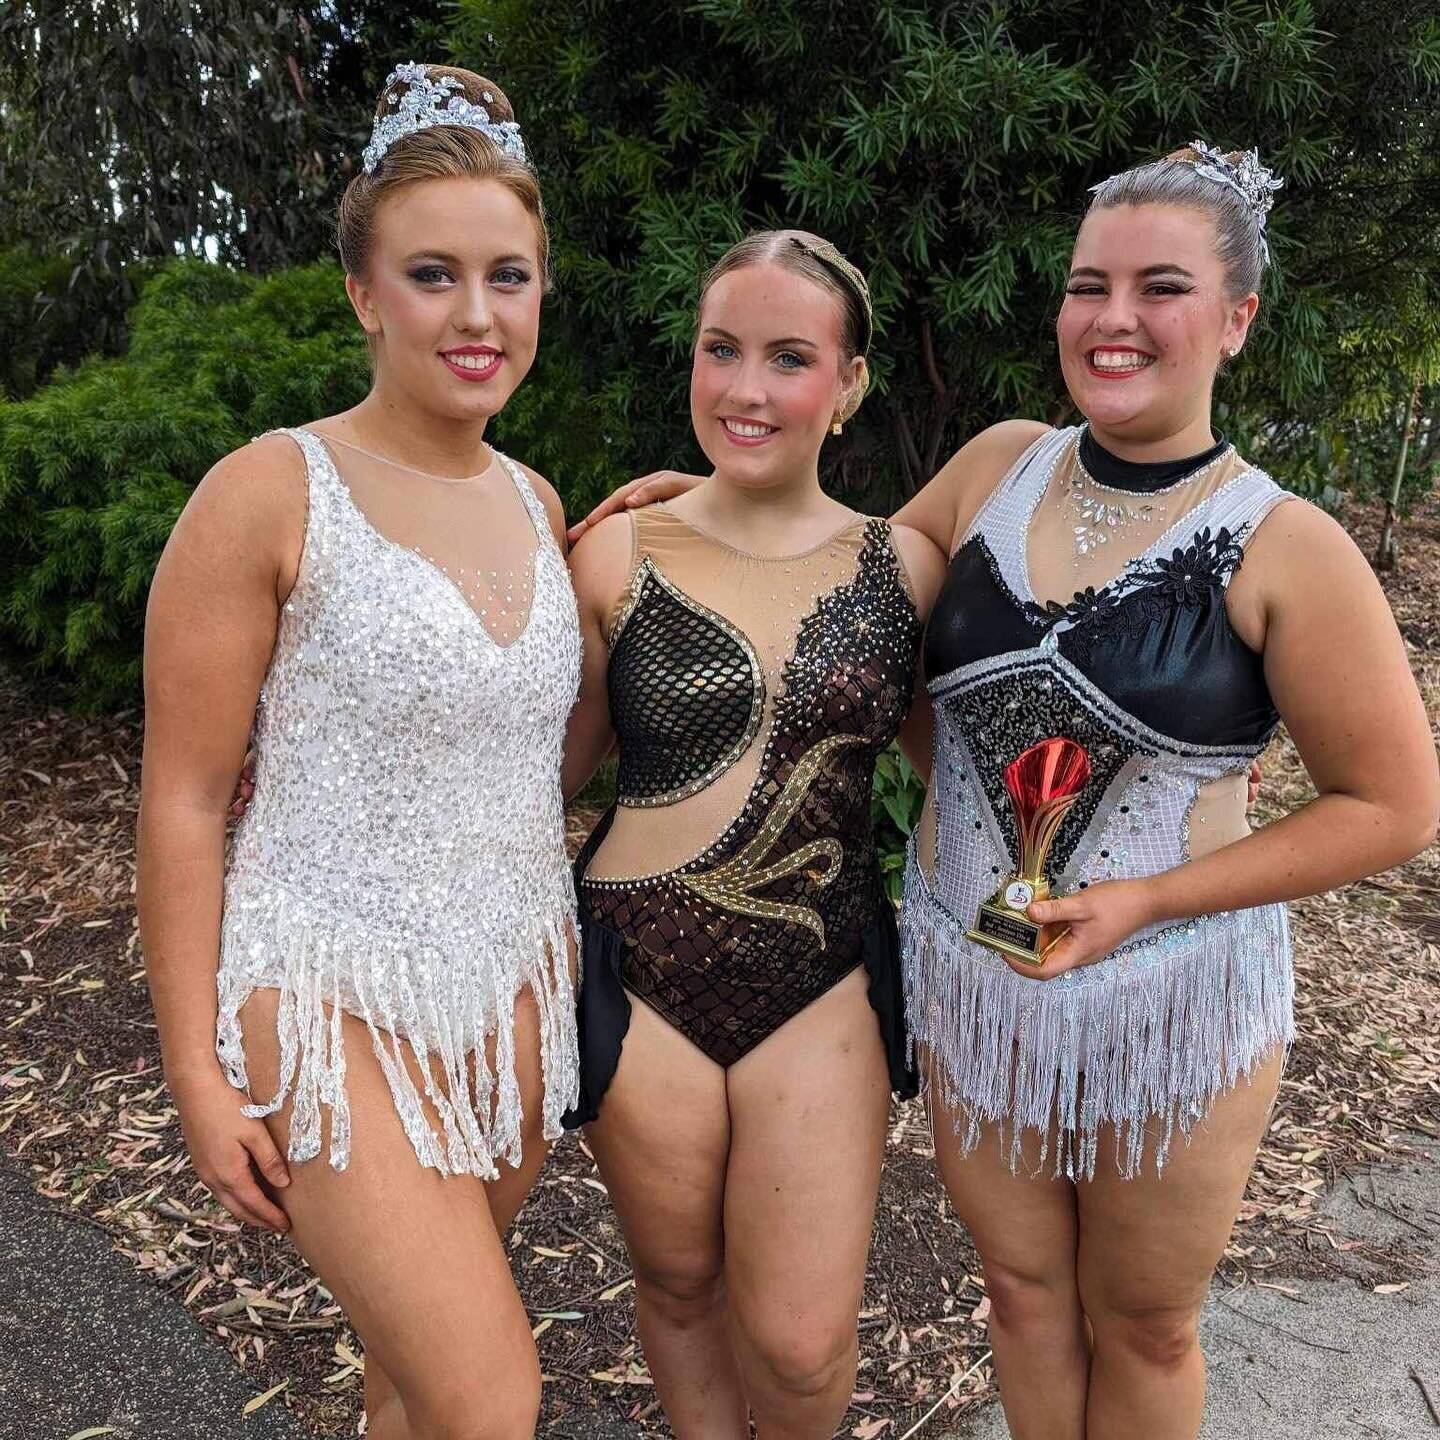 And we have started weekend one of solos with a BANG!

Well done to all competitors who took to the stage this weekend- an achievement in itself!

Congratulations to our place getters:
🌟 Peta - 3rd
🌟 Sareena &amp; Izzy (@auroracals ) - HM (4th)
🌟 